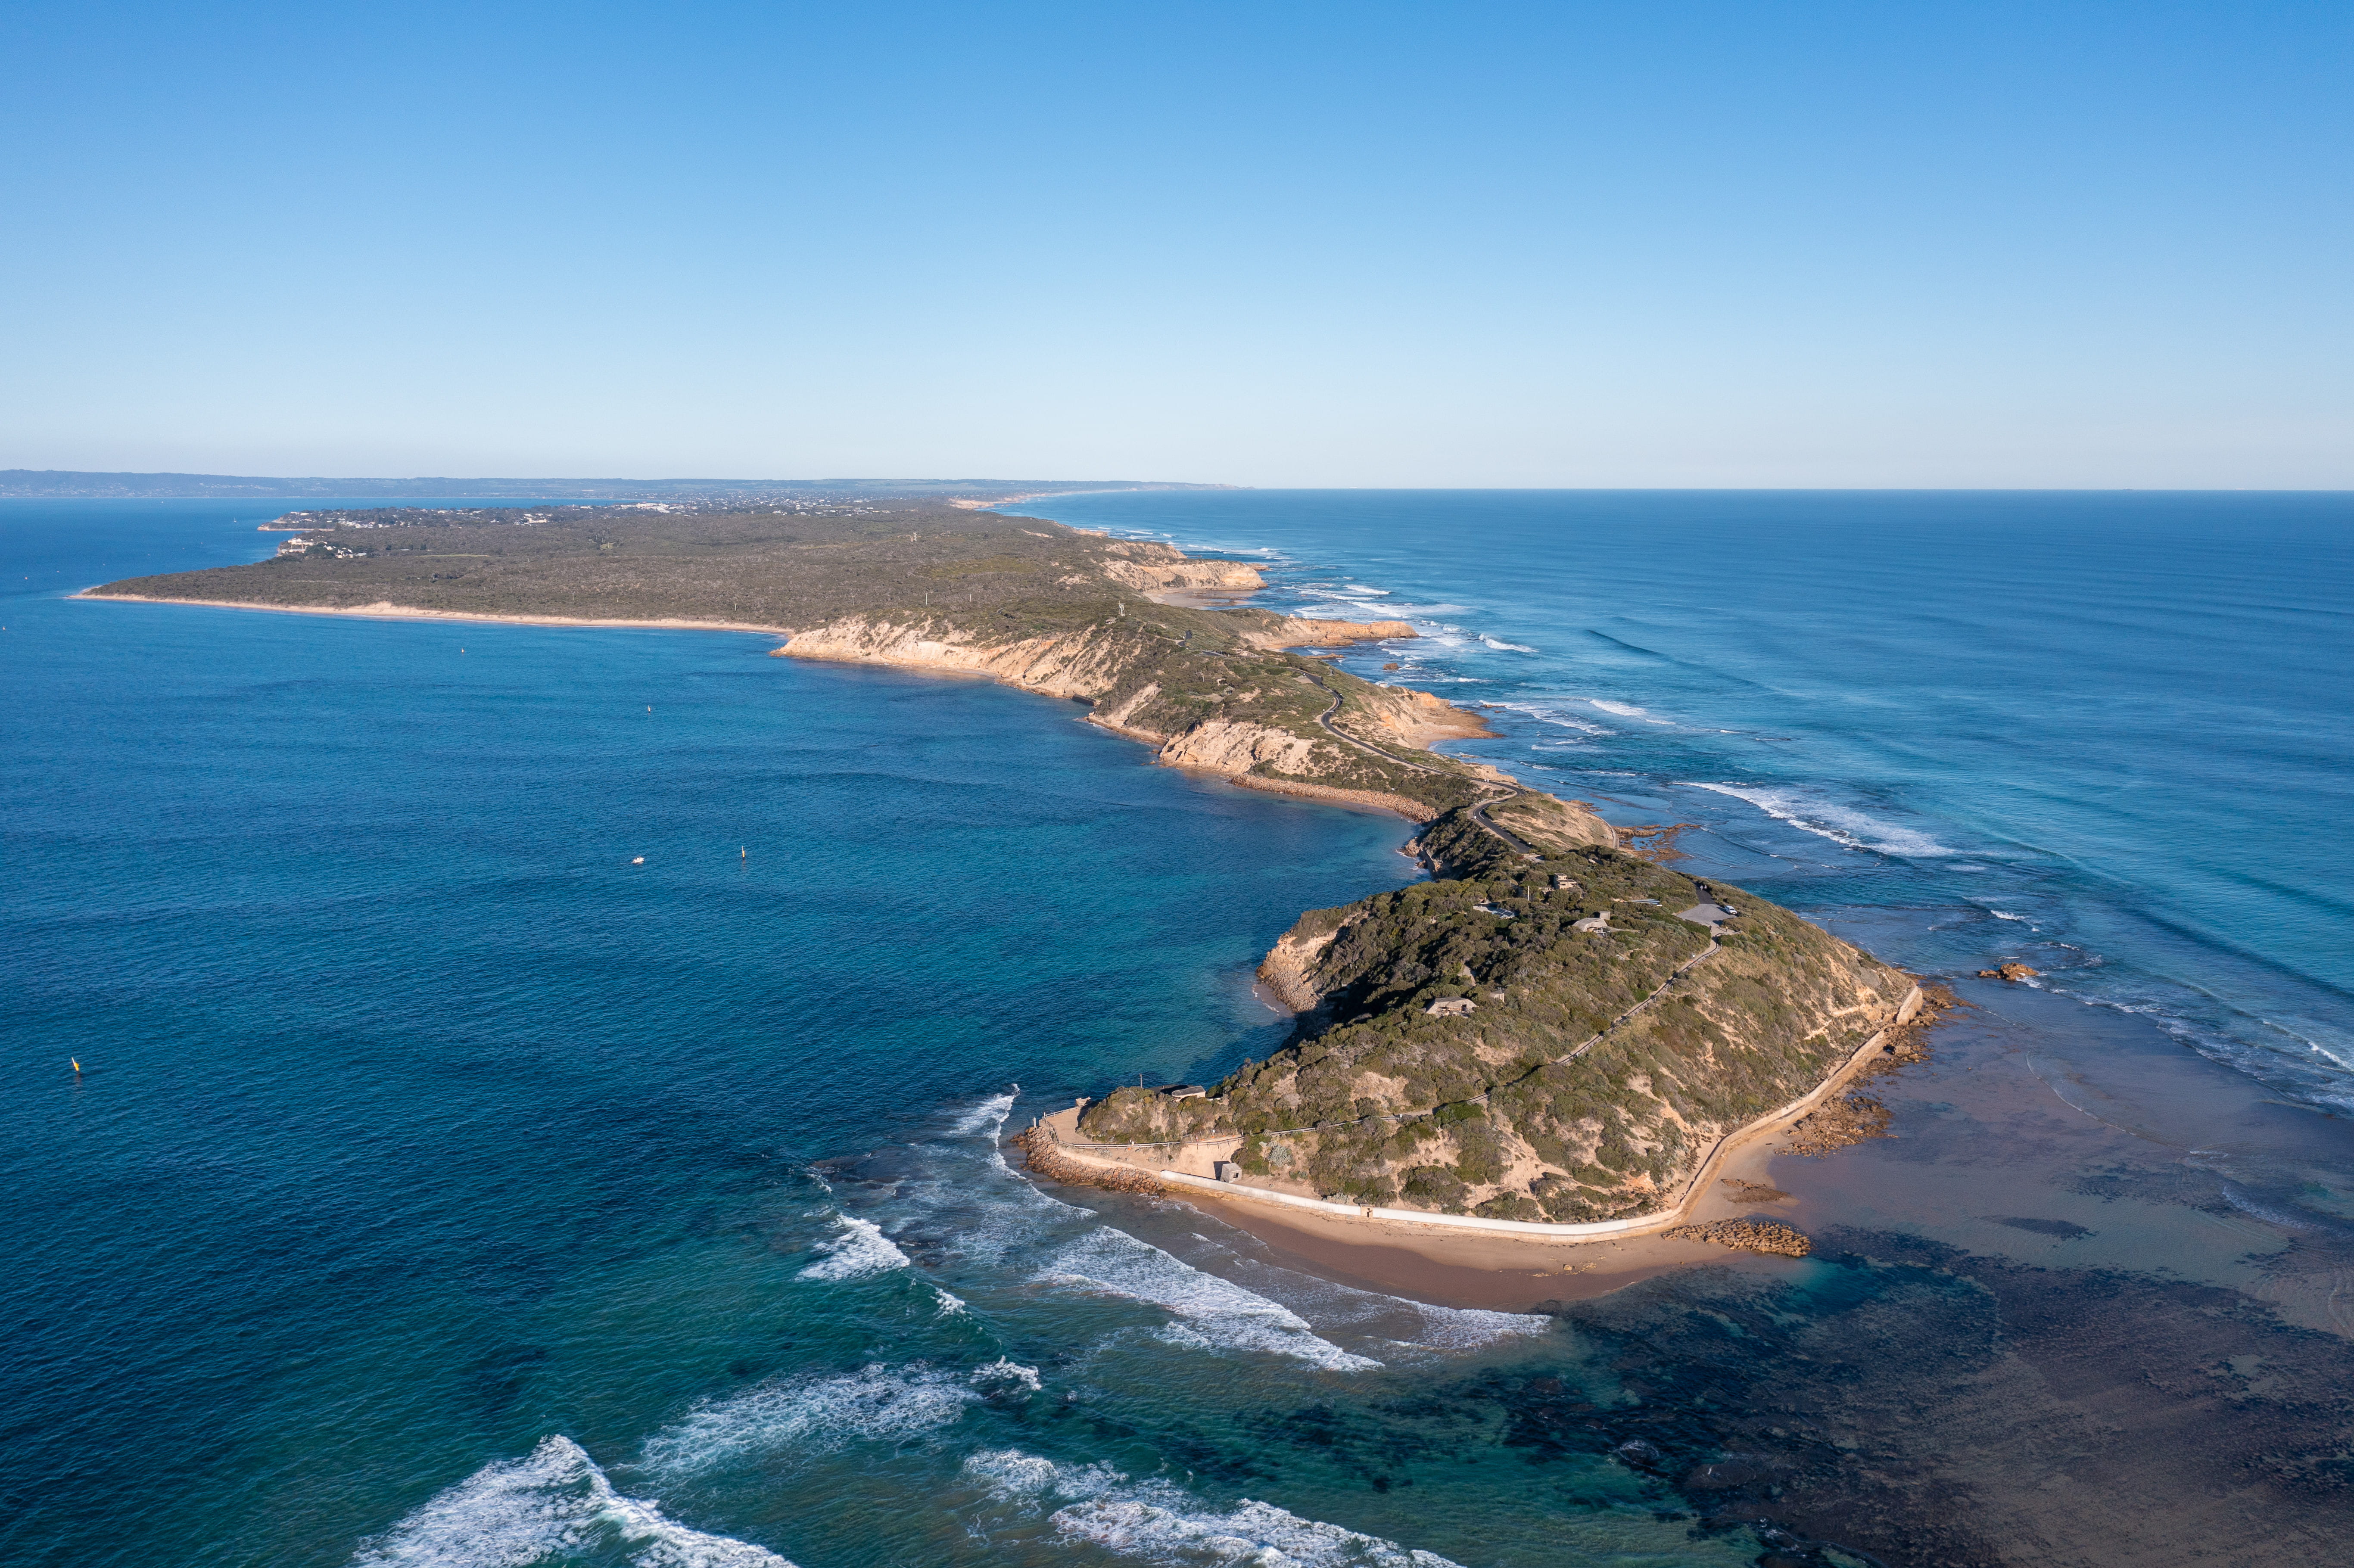 A view of Point Nepean National Park from the sky - a long and narrow strip of land, boarded by beaches and surrounded by blue ocean. 